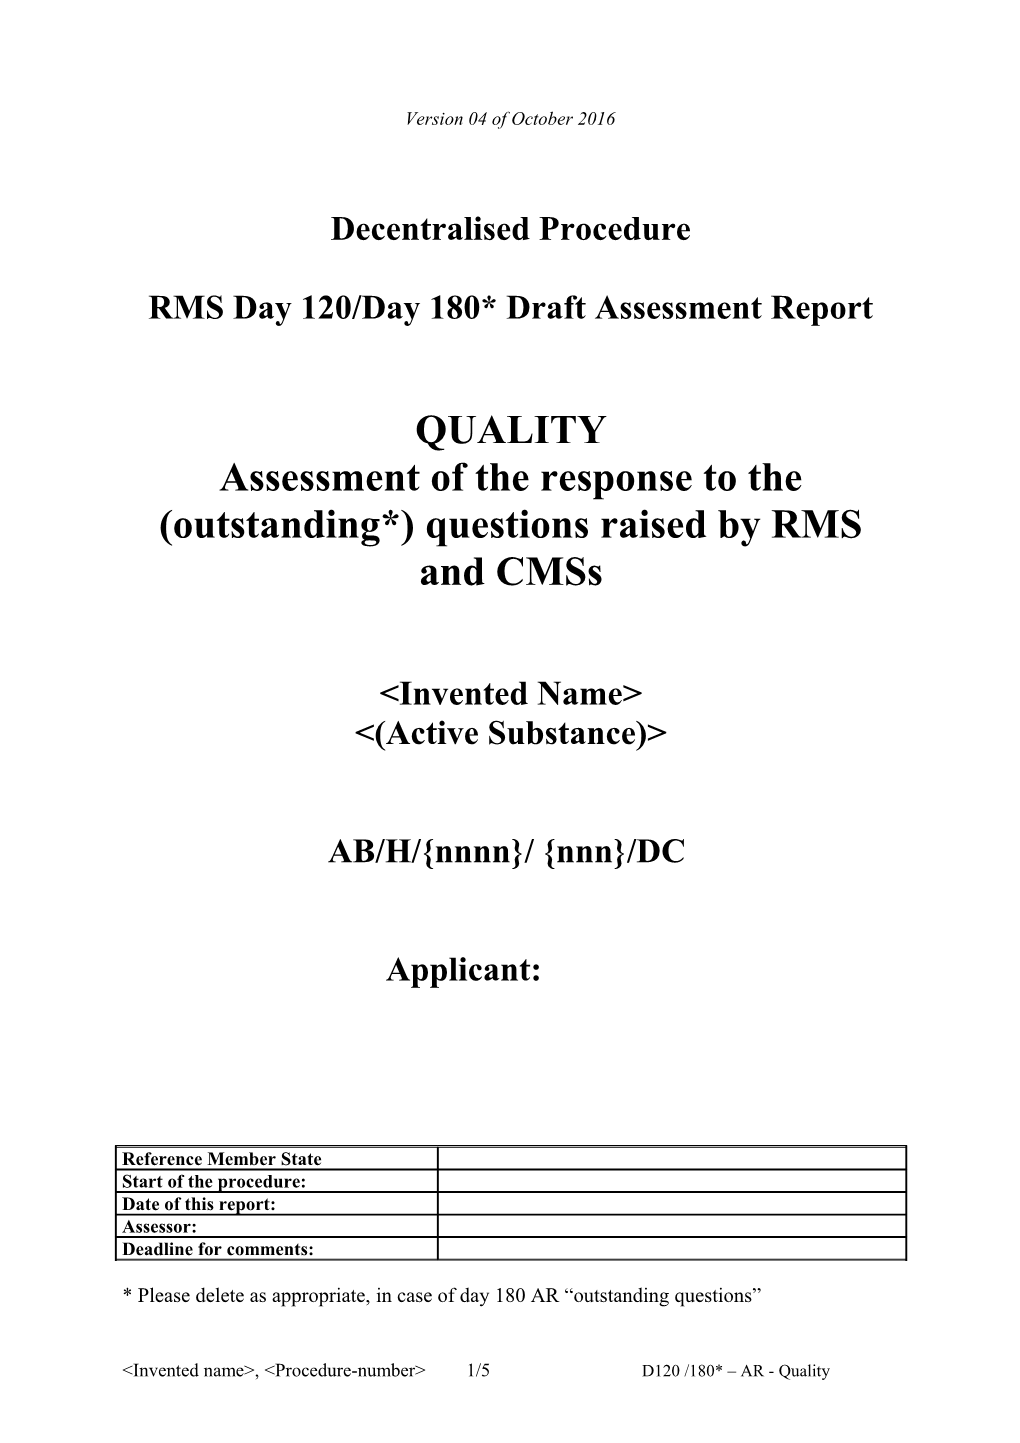 RMS Day 120/Day 180*Draft Assessment Report